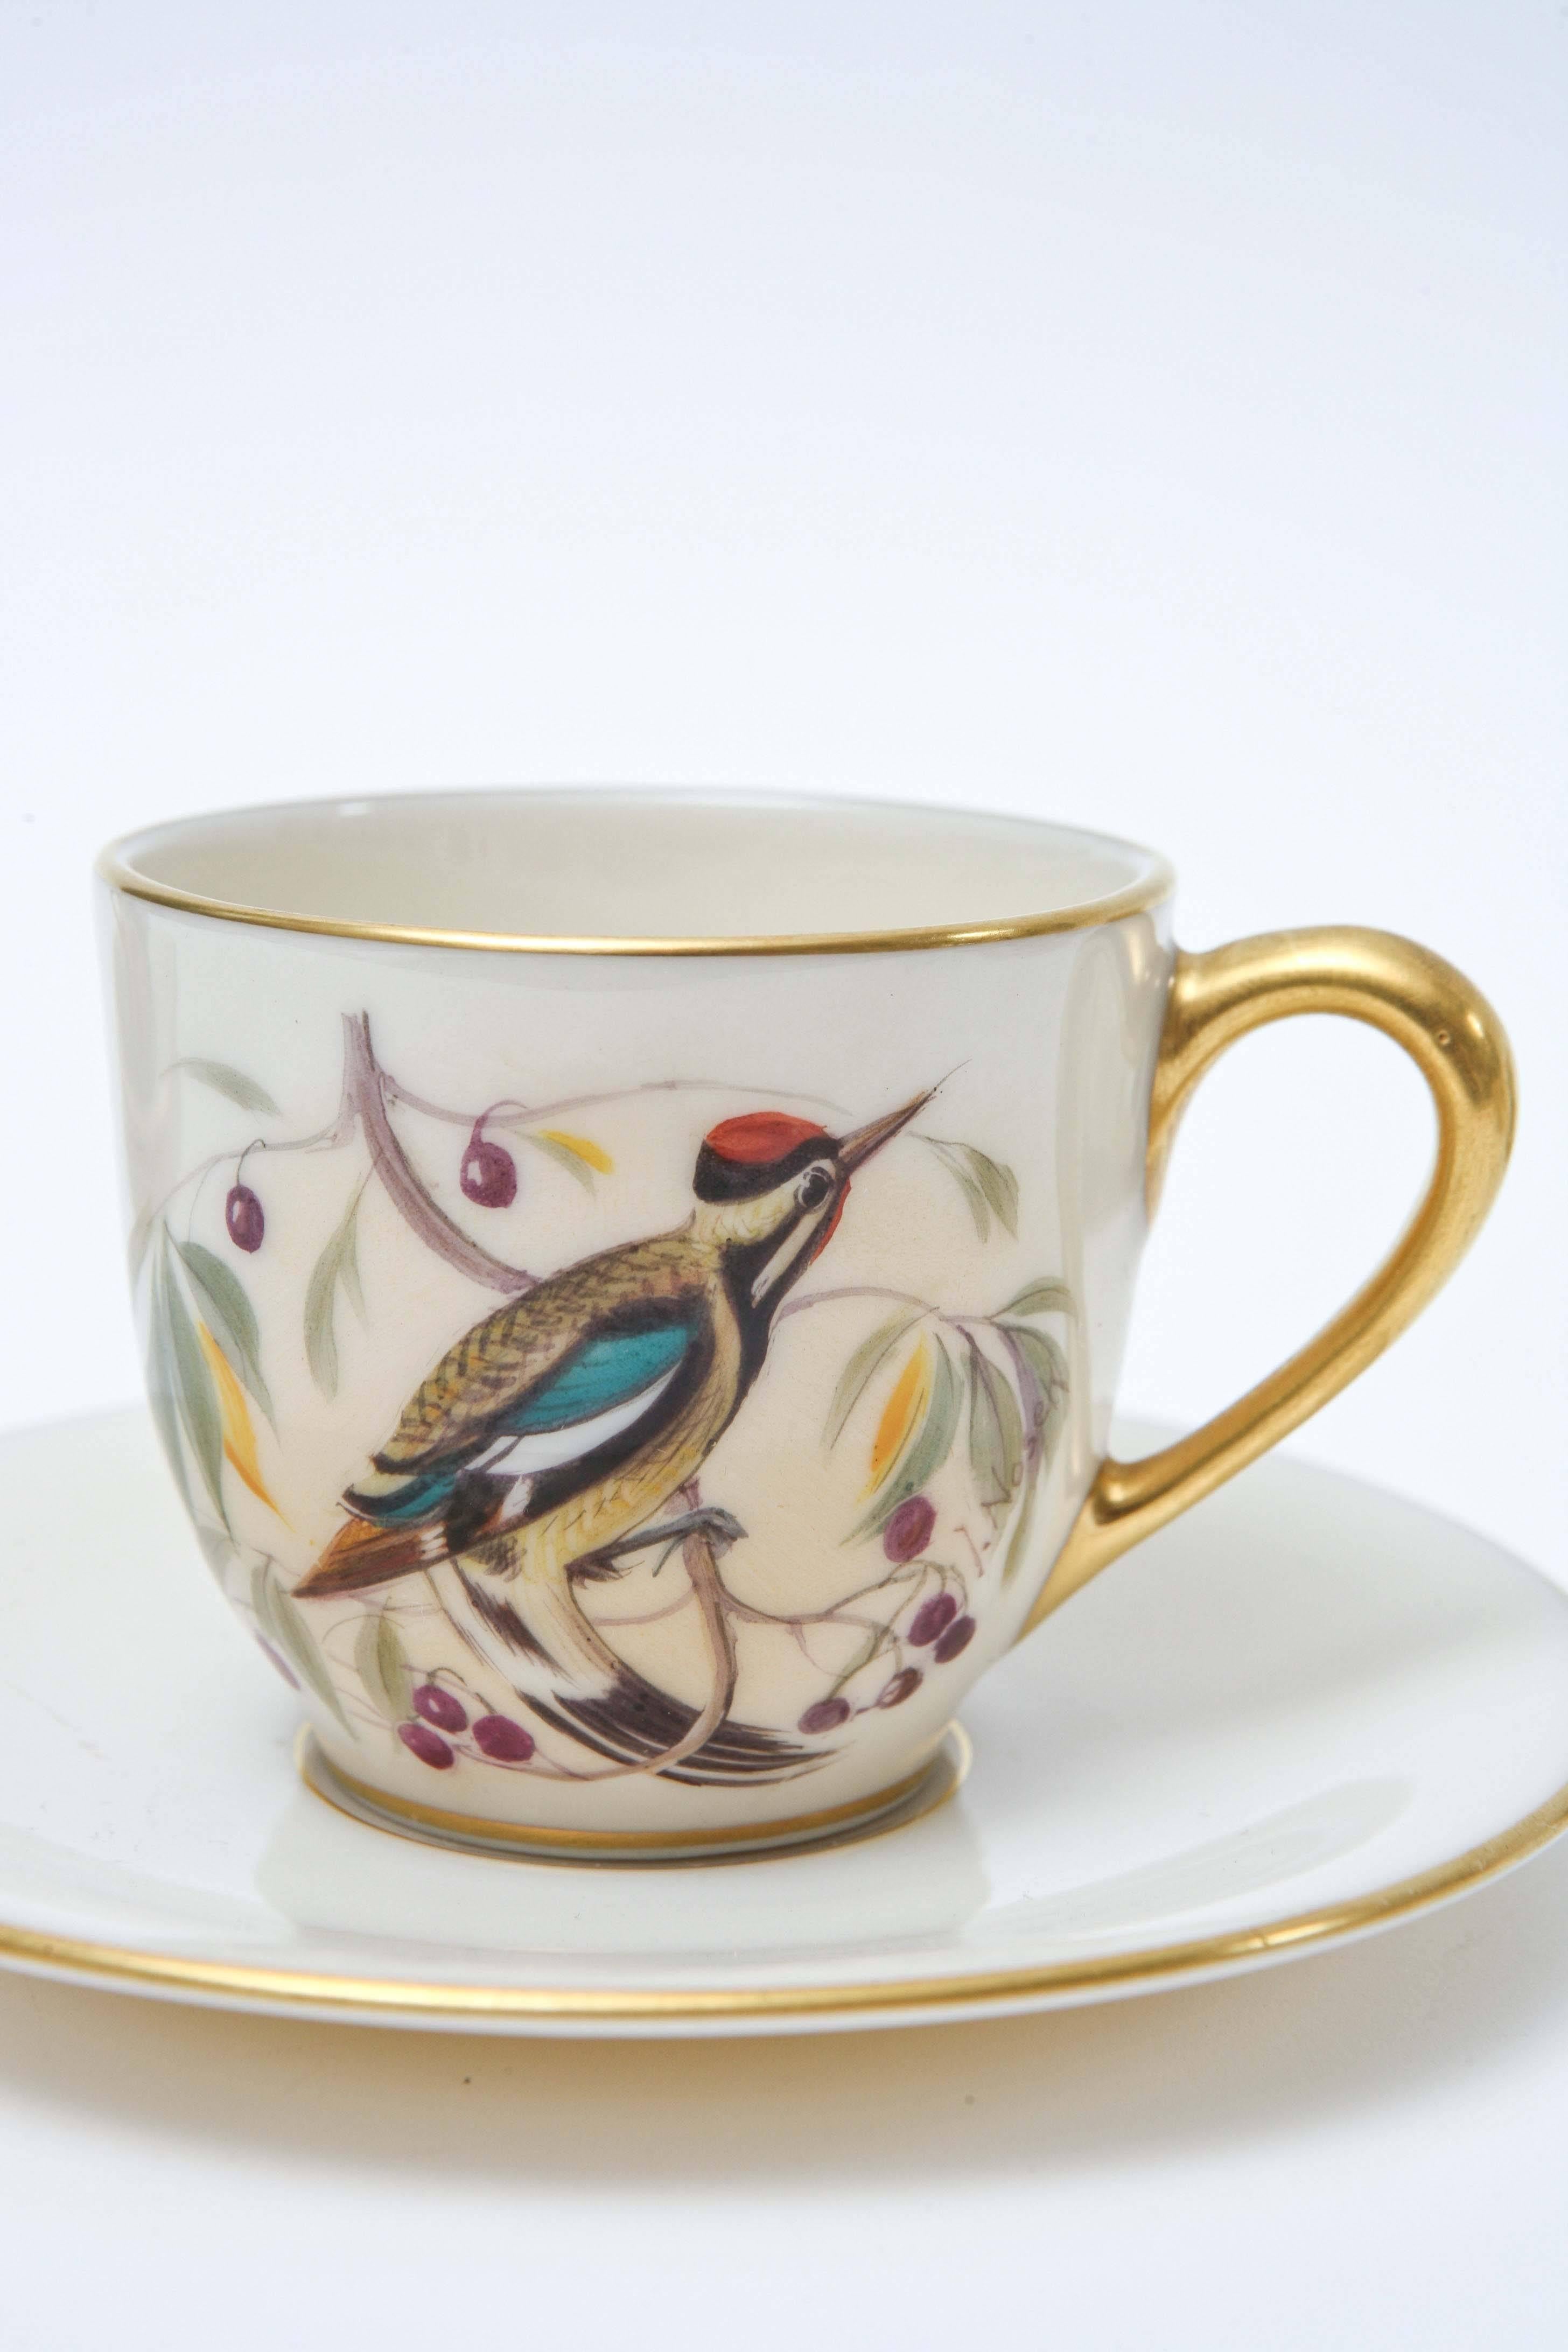 Gold Six Charming Hand-Painted Song Bird Cup and Saucers, Vintage Lenox